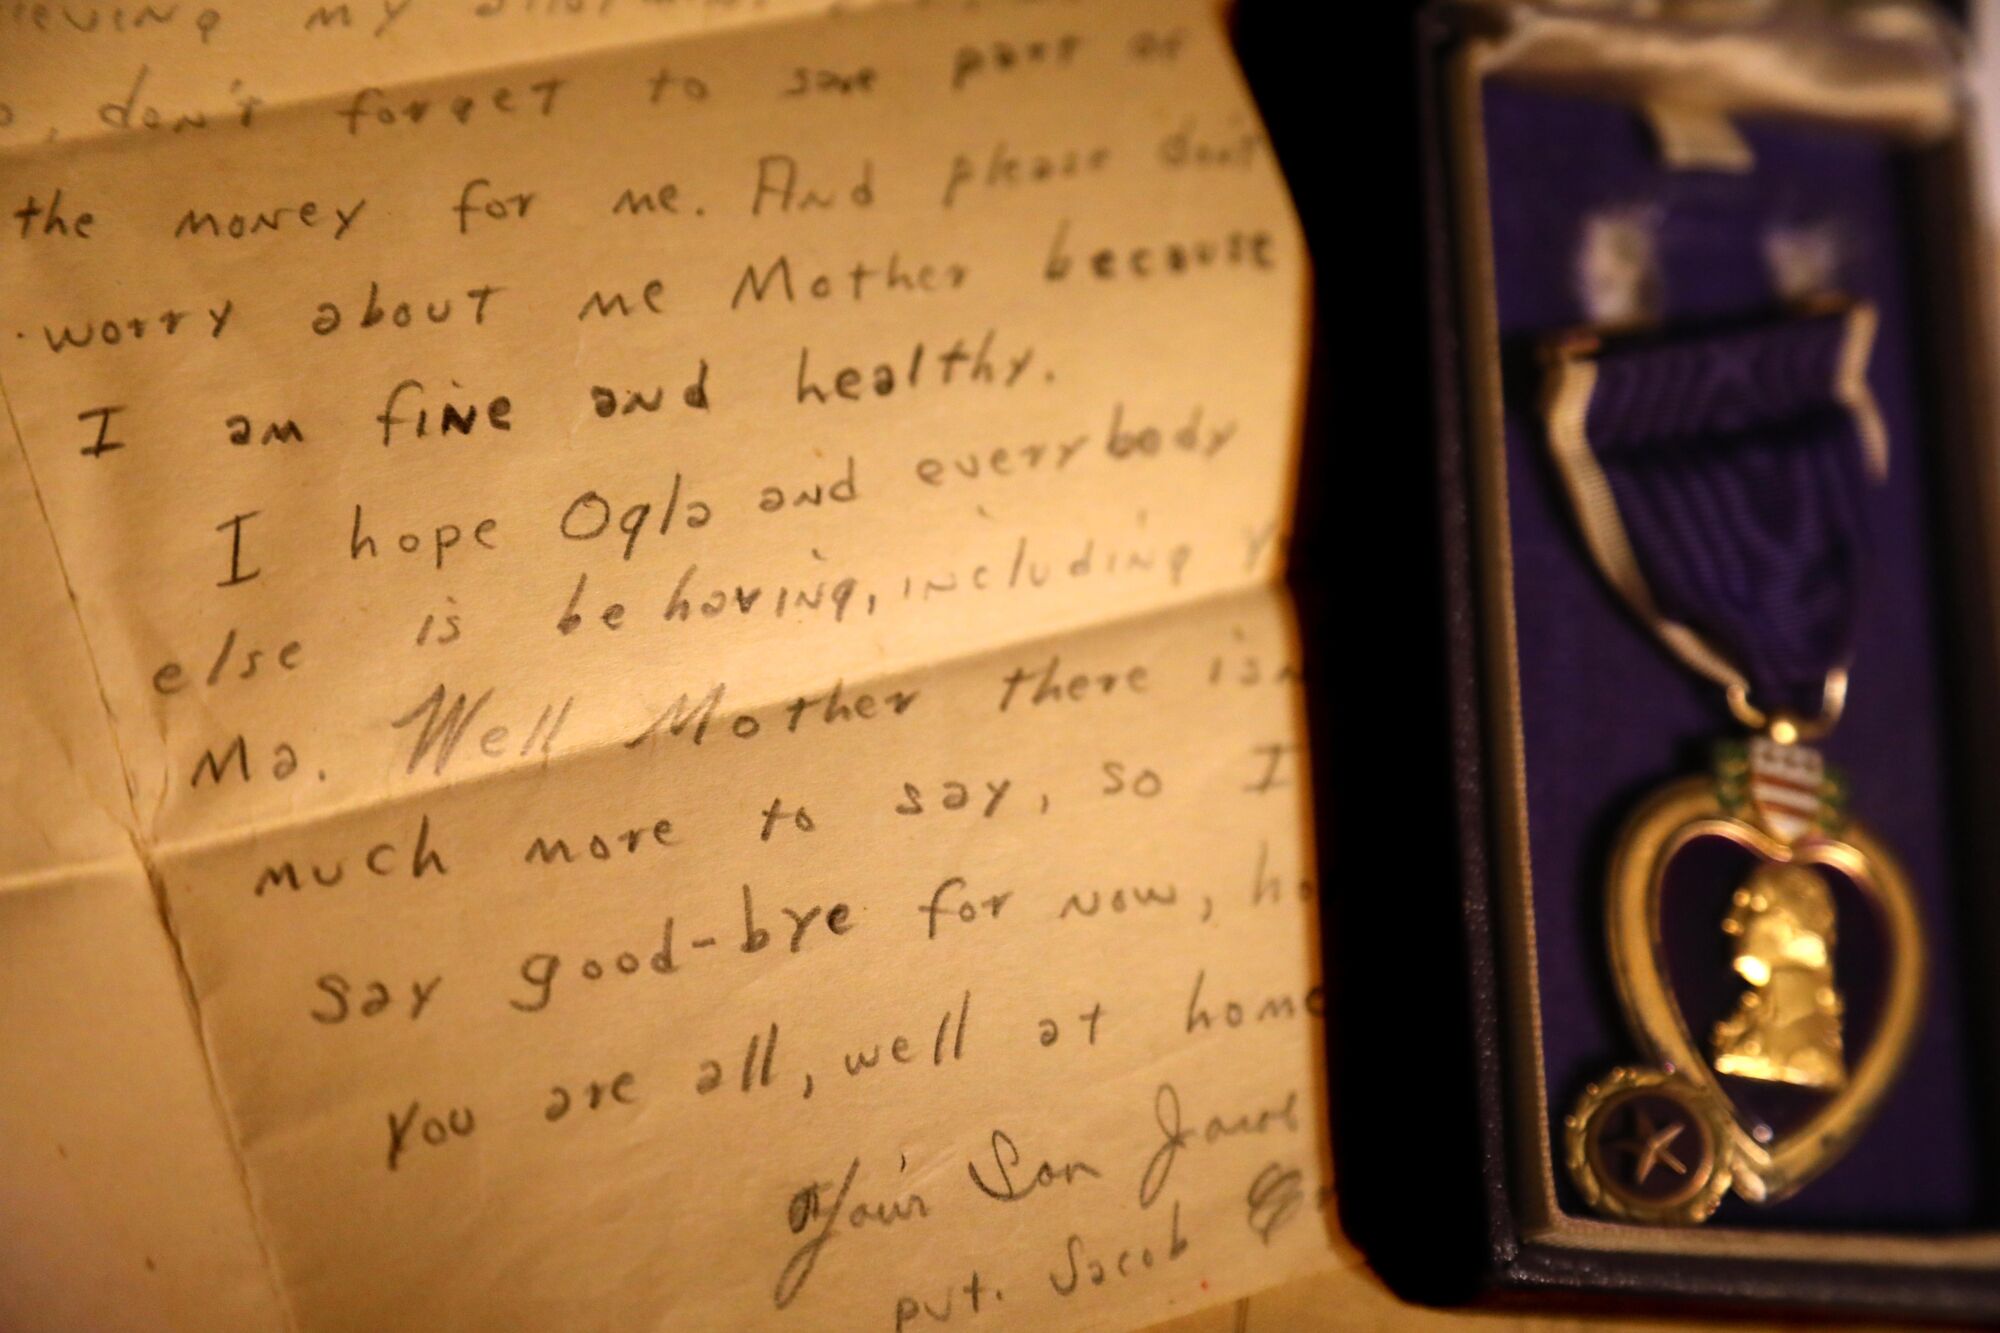 "I am fine and healthy," part of a letter states, shown next to a medal.